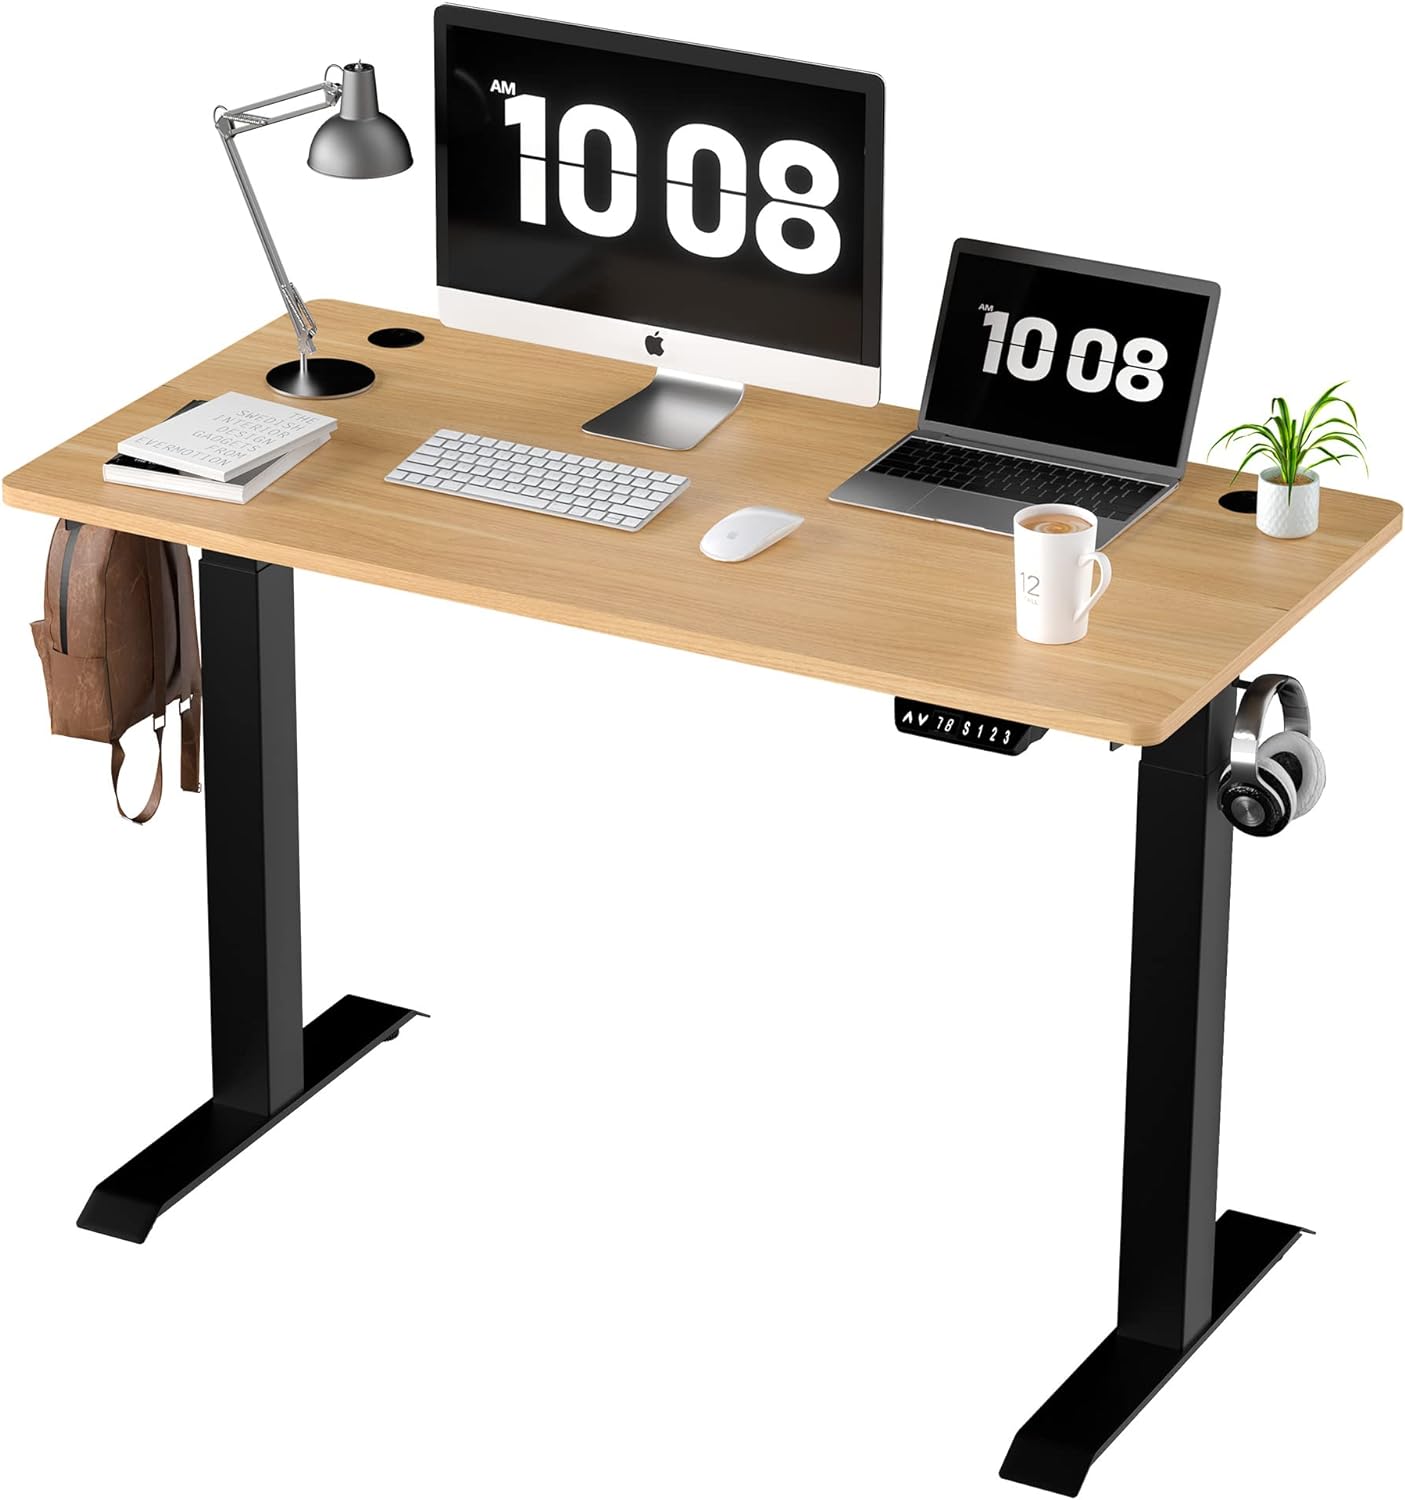 Easy to assemble, very clear instructions and easy to follow, just youll someone to help you to flip it over because its very heavy. Overall, I love my desk